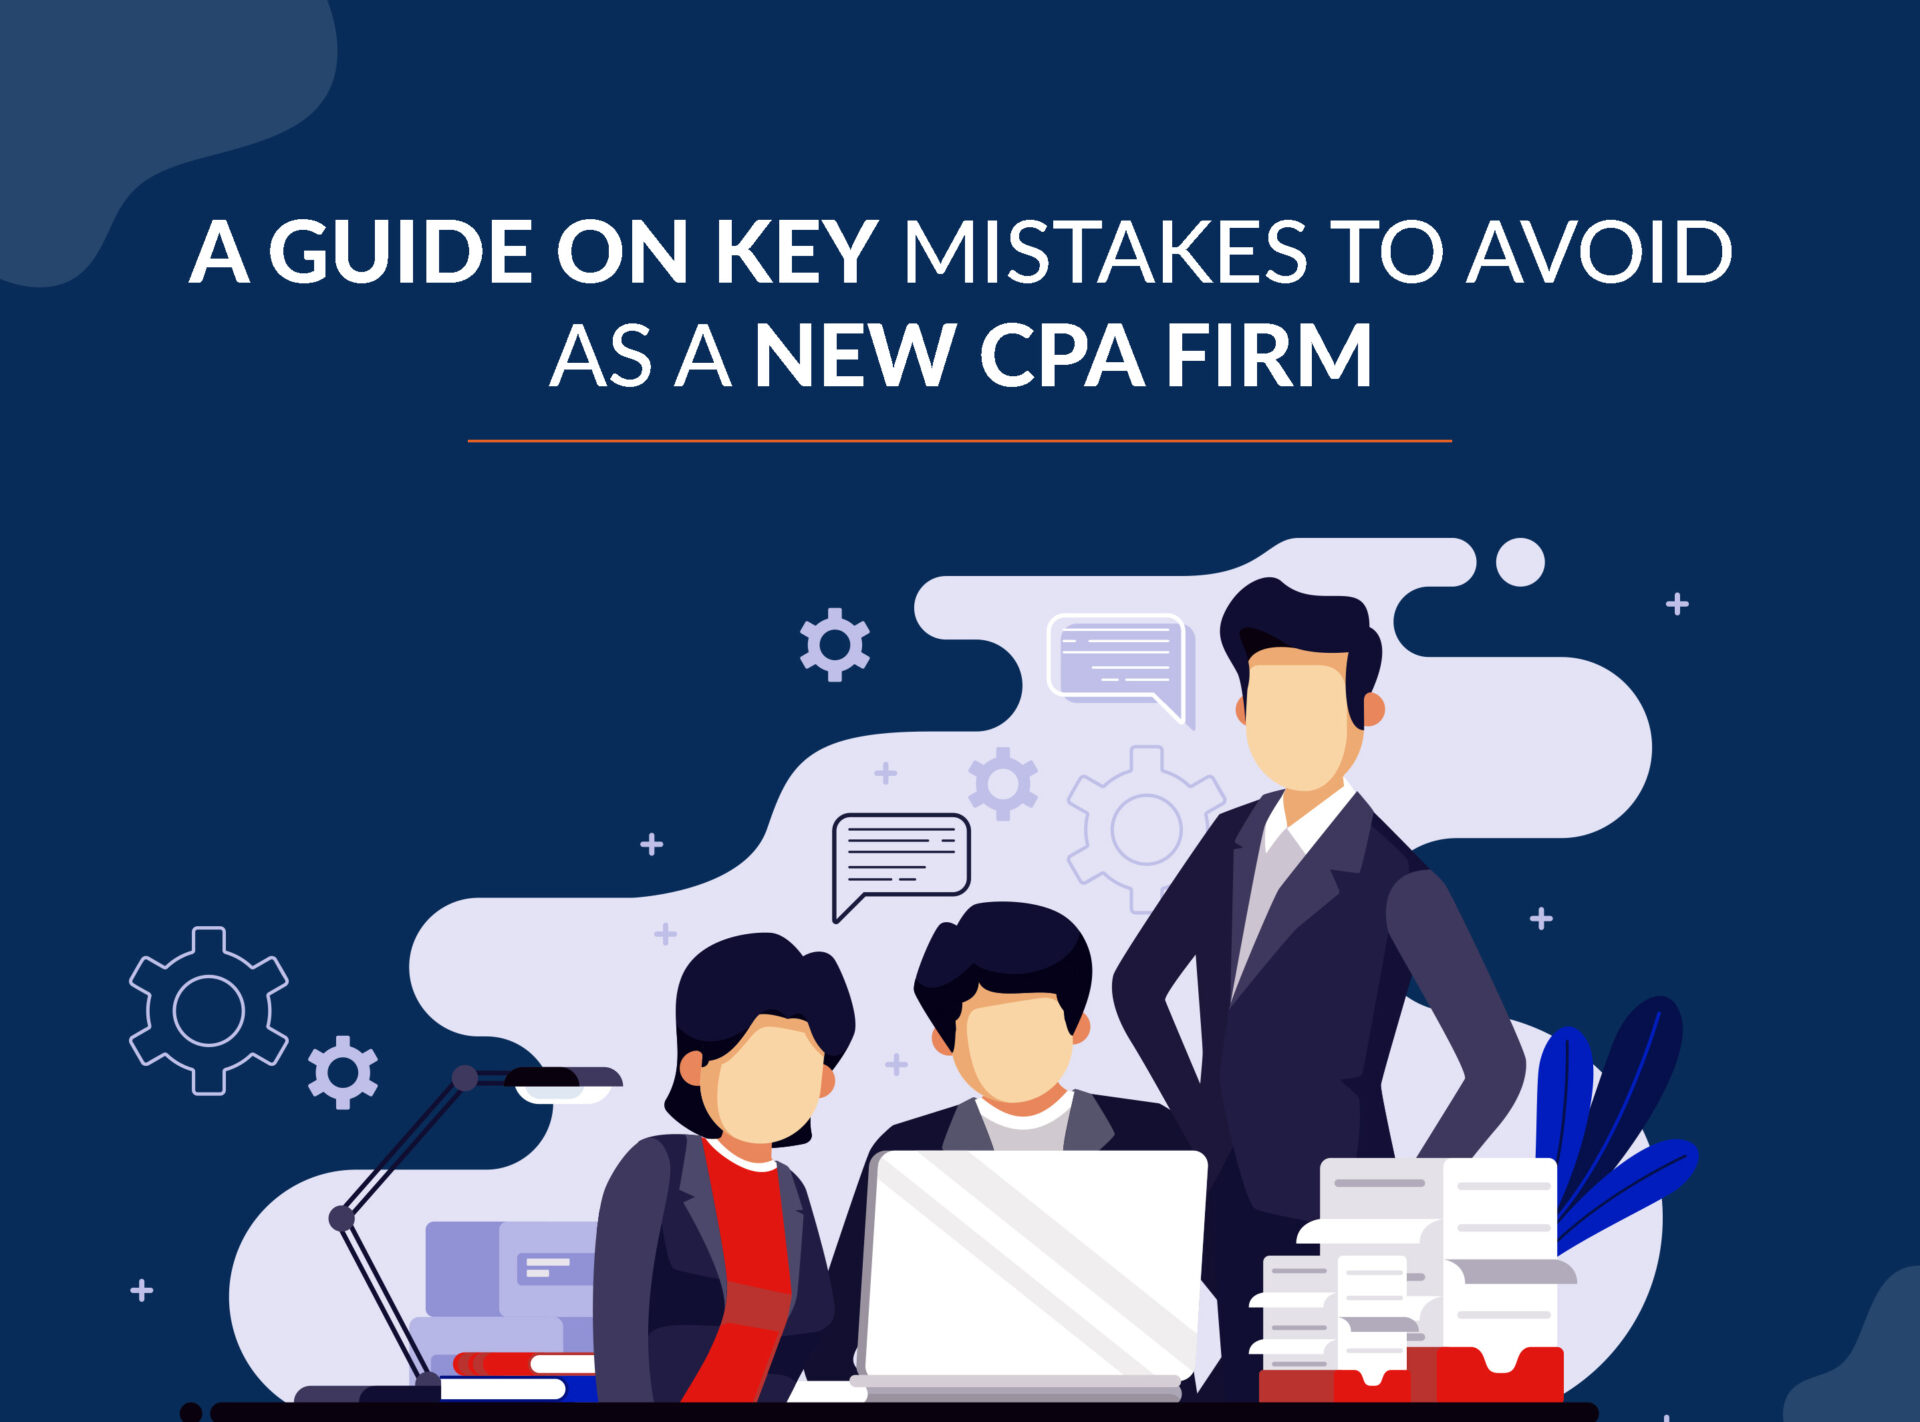 9 Biggest Mistakes to Avoid as A New CPA Firm